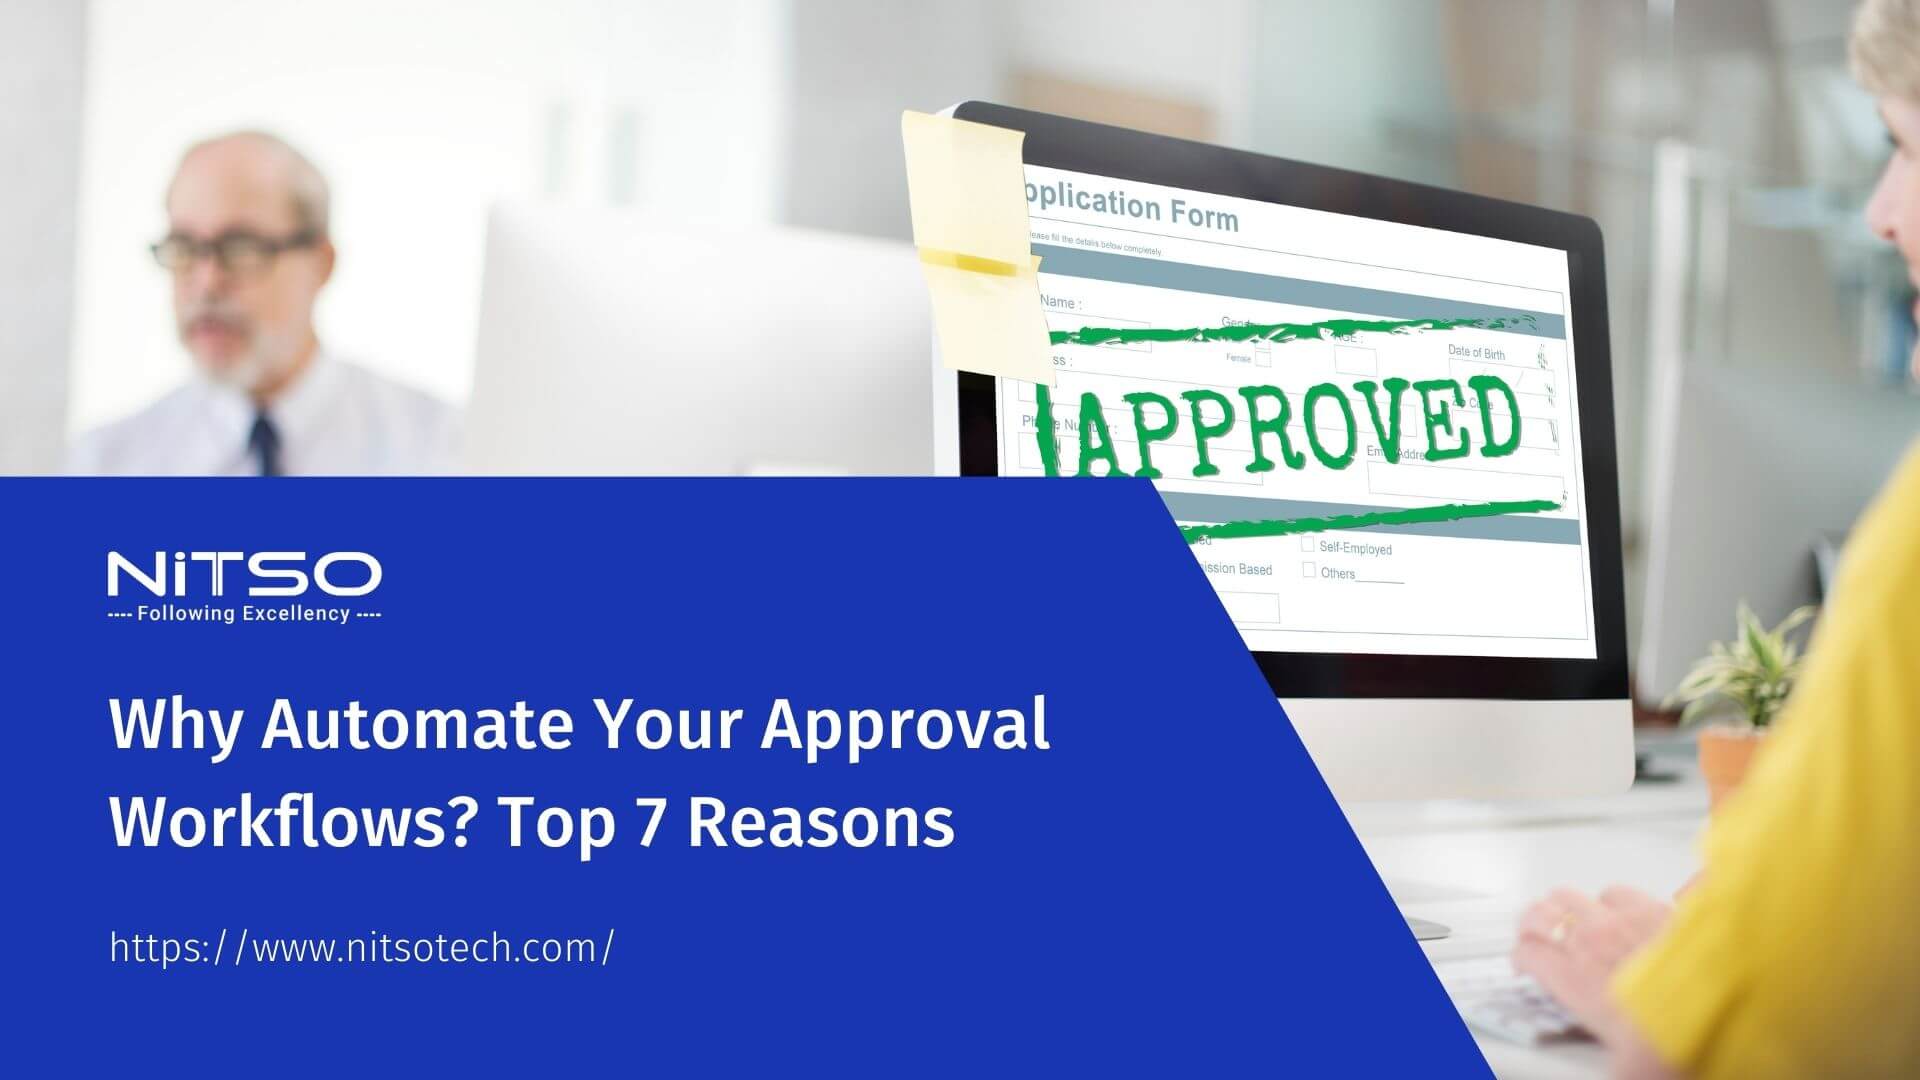 Why Automate Your Approval Workflows? Top 7 Reasons